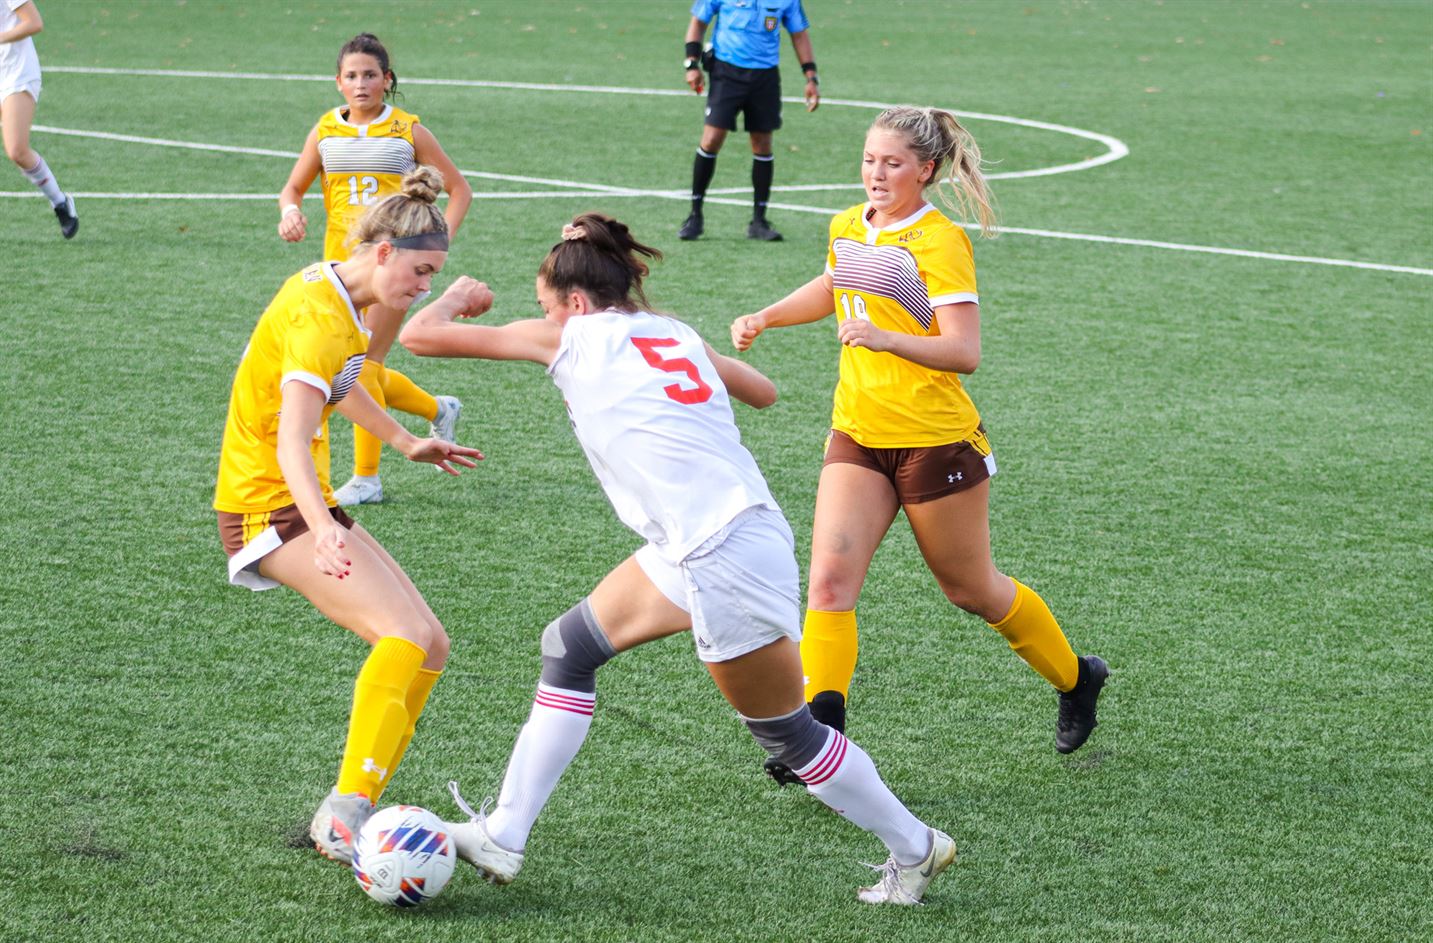 Freshman defender Ashley DeFrancesco was willing her way through the defense to get an open opportunity. Trevor Giesberg | The Montclarion